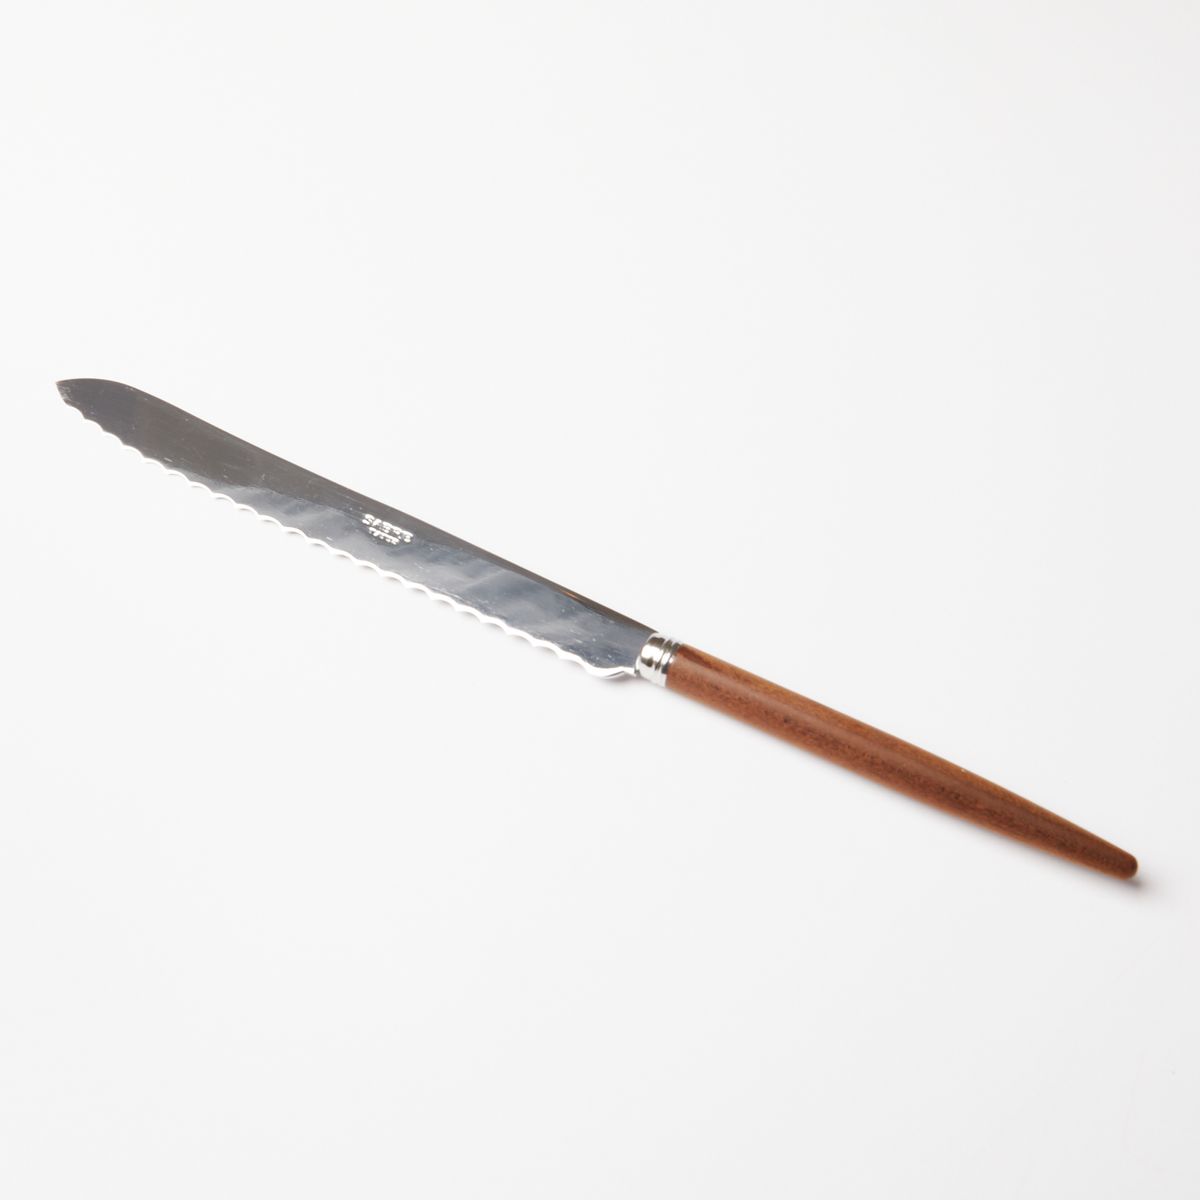 A long bread knife with a steel blade and simple wood handle